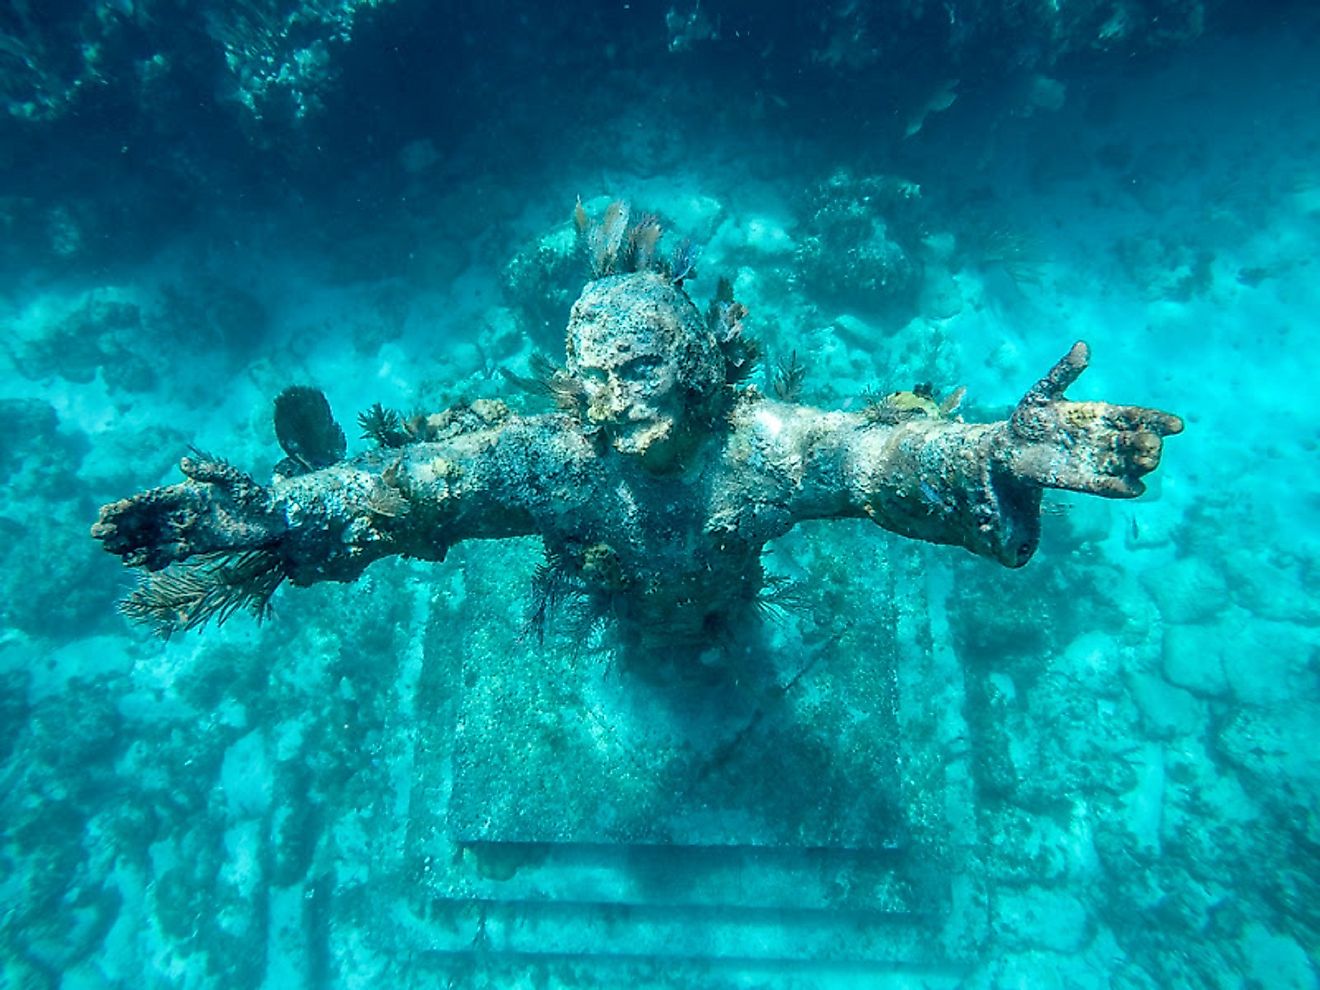 A statue of Jesus Christ that is placed underwater and is more than 8 feet tall.